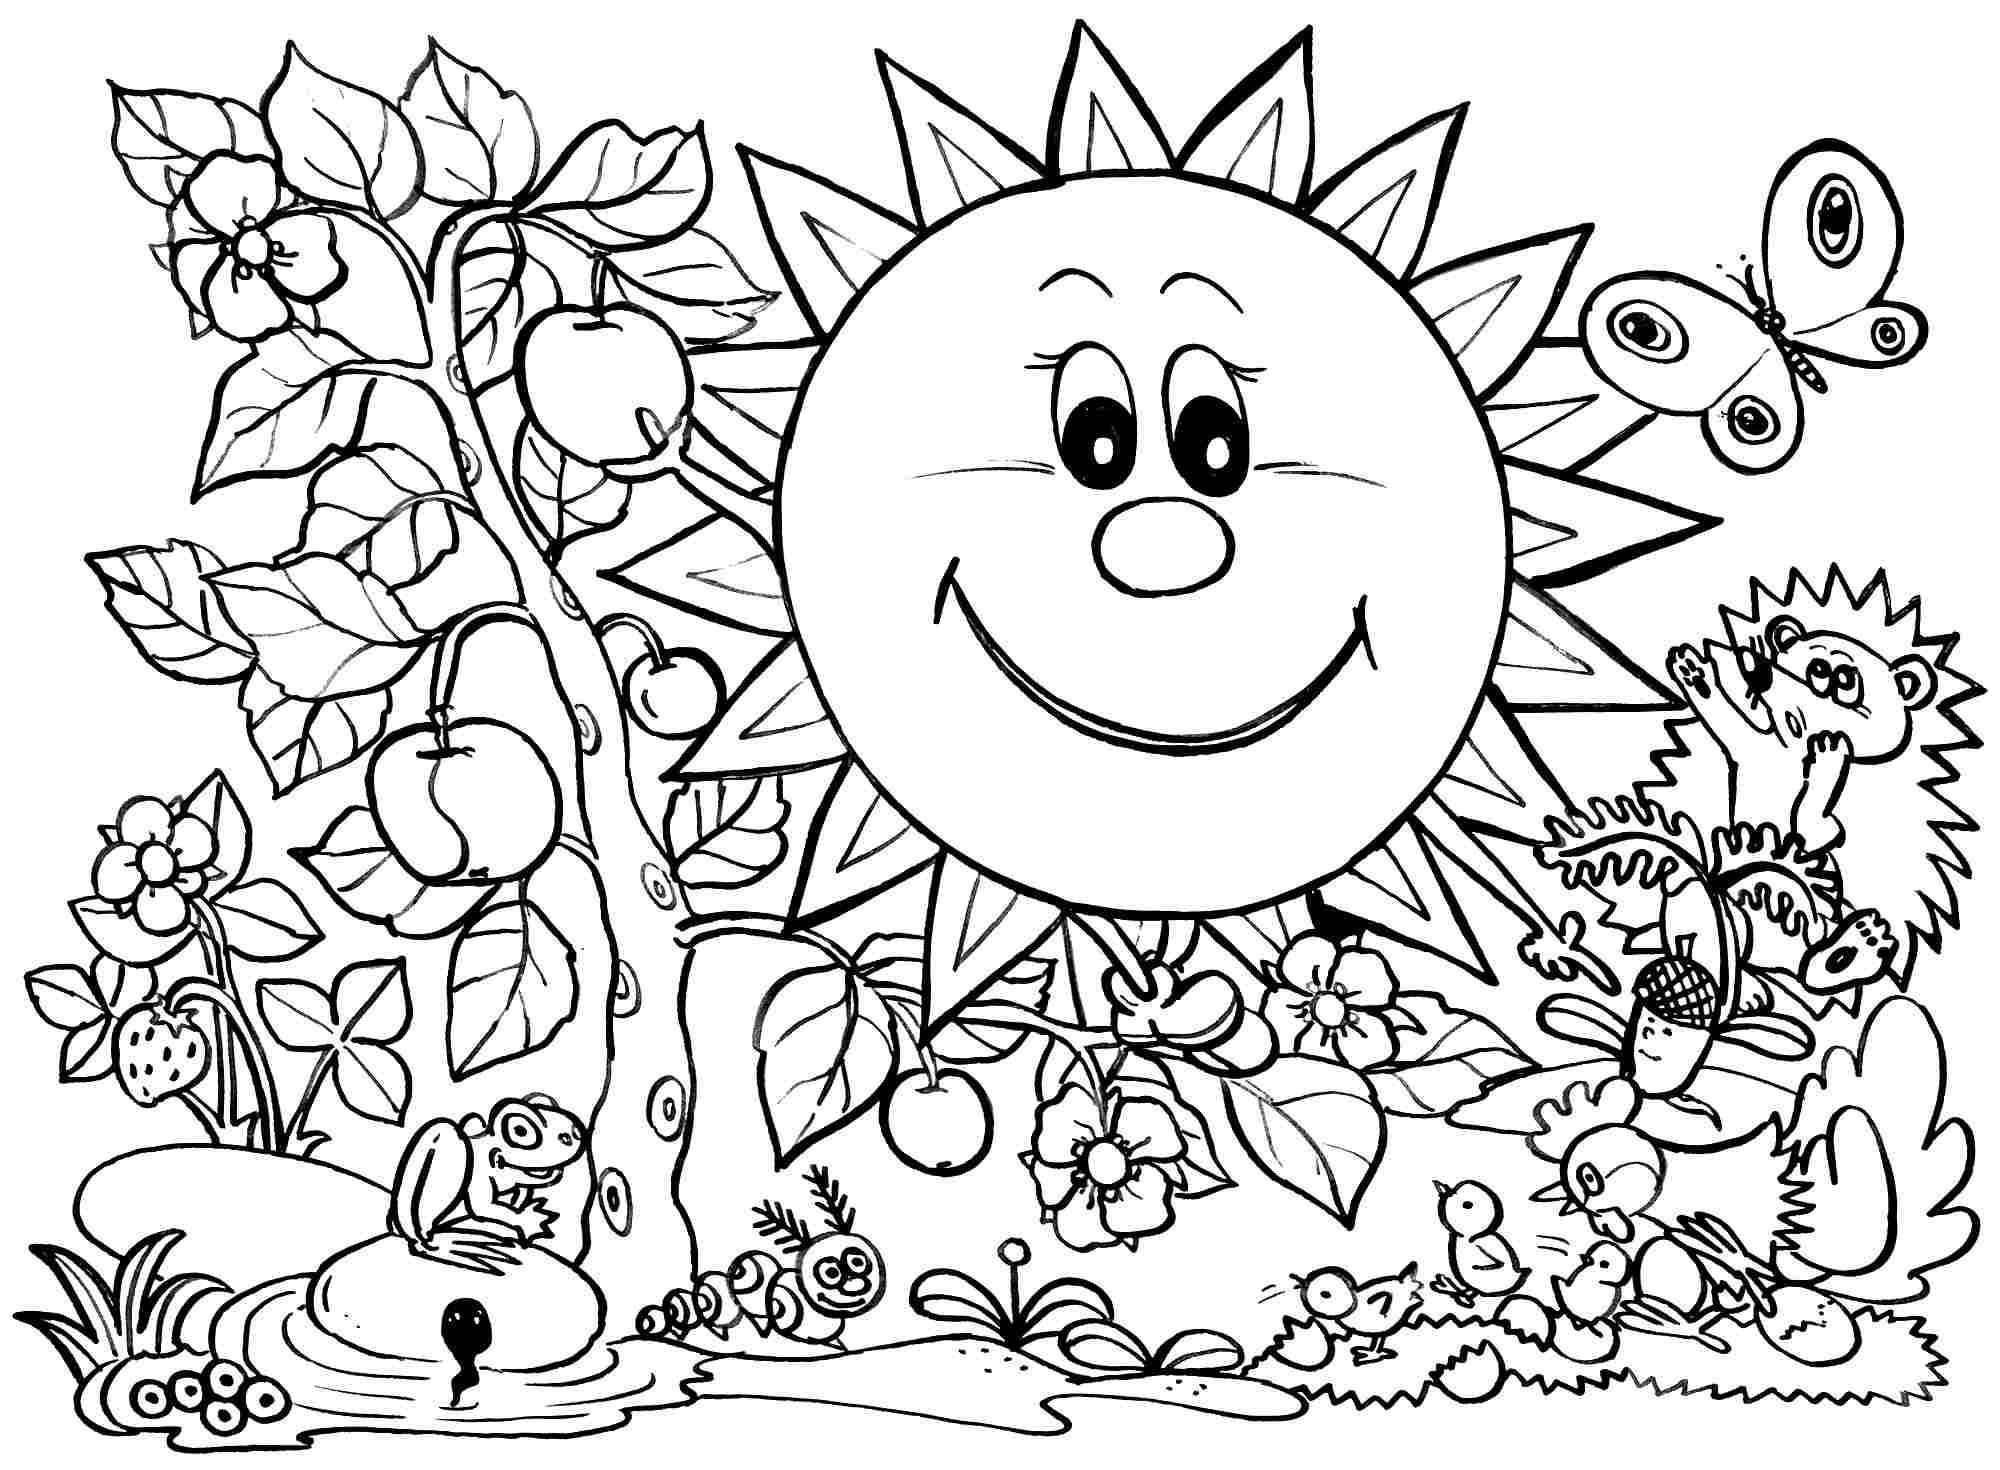 Free Coloring Pages Spring Season - Coloring Home